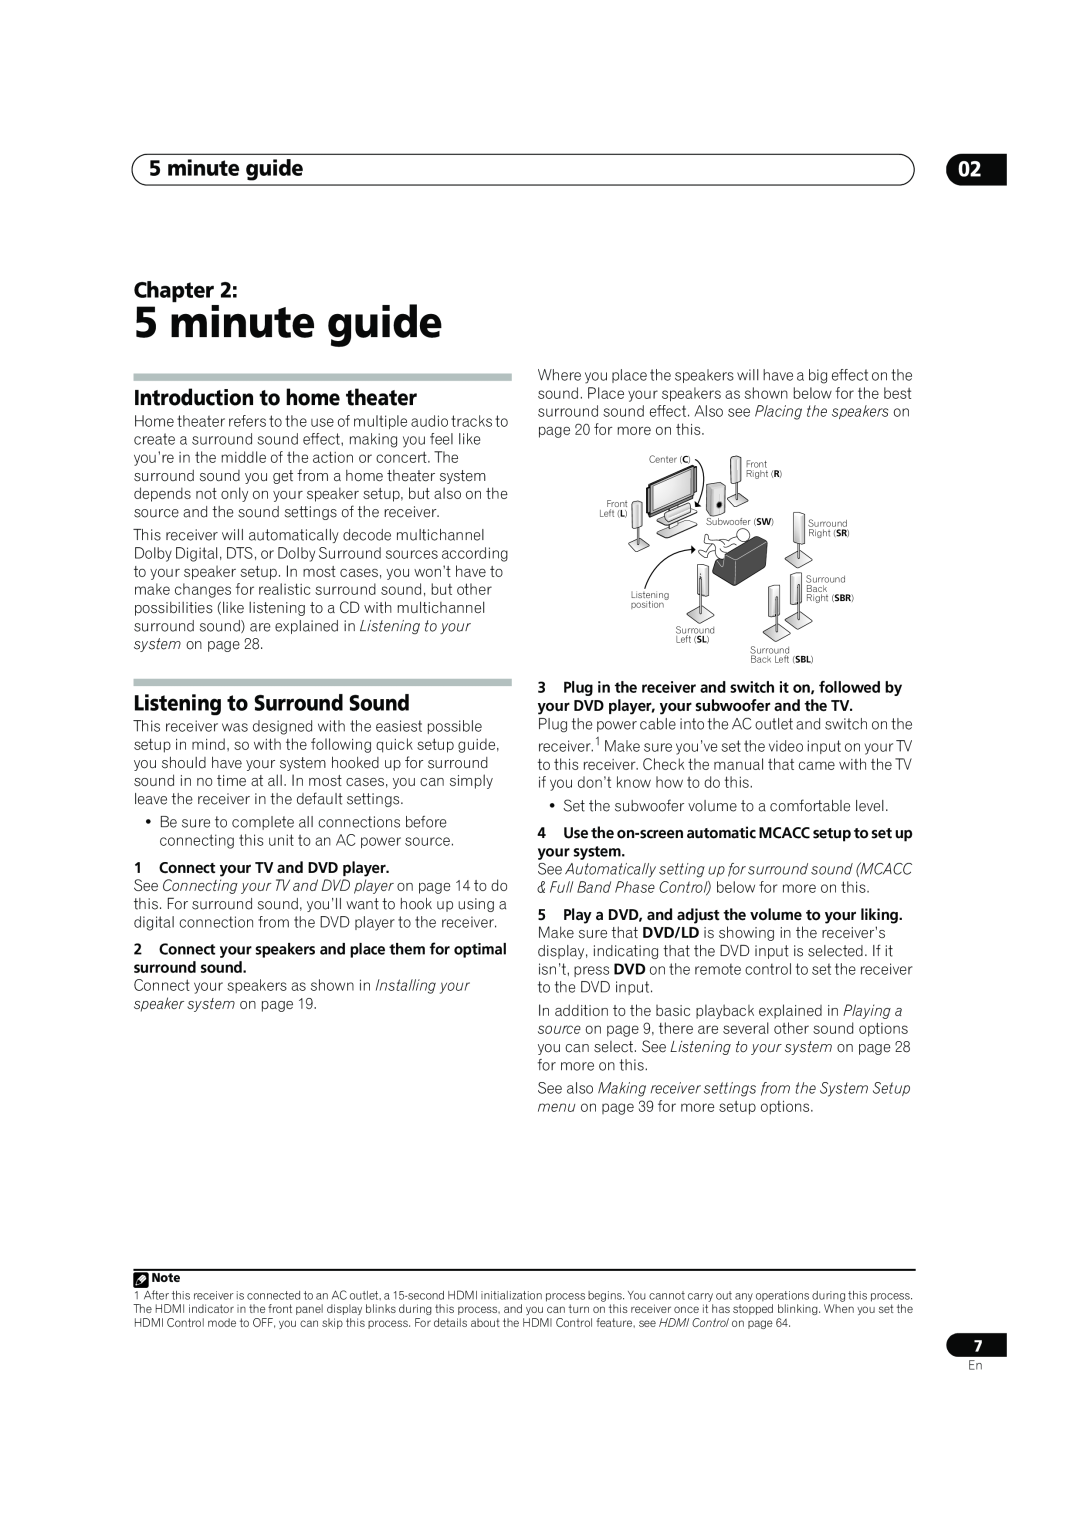 Pioneer VSX-LX60 operating instructions minute guide Chapter, Introduction to home theater, Listening to Surround Sound 